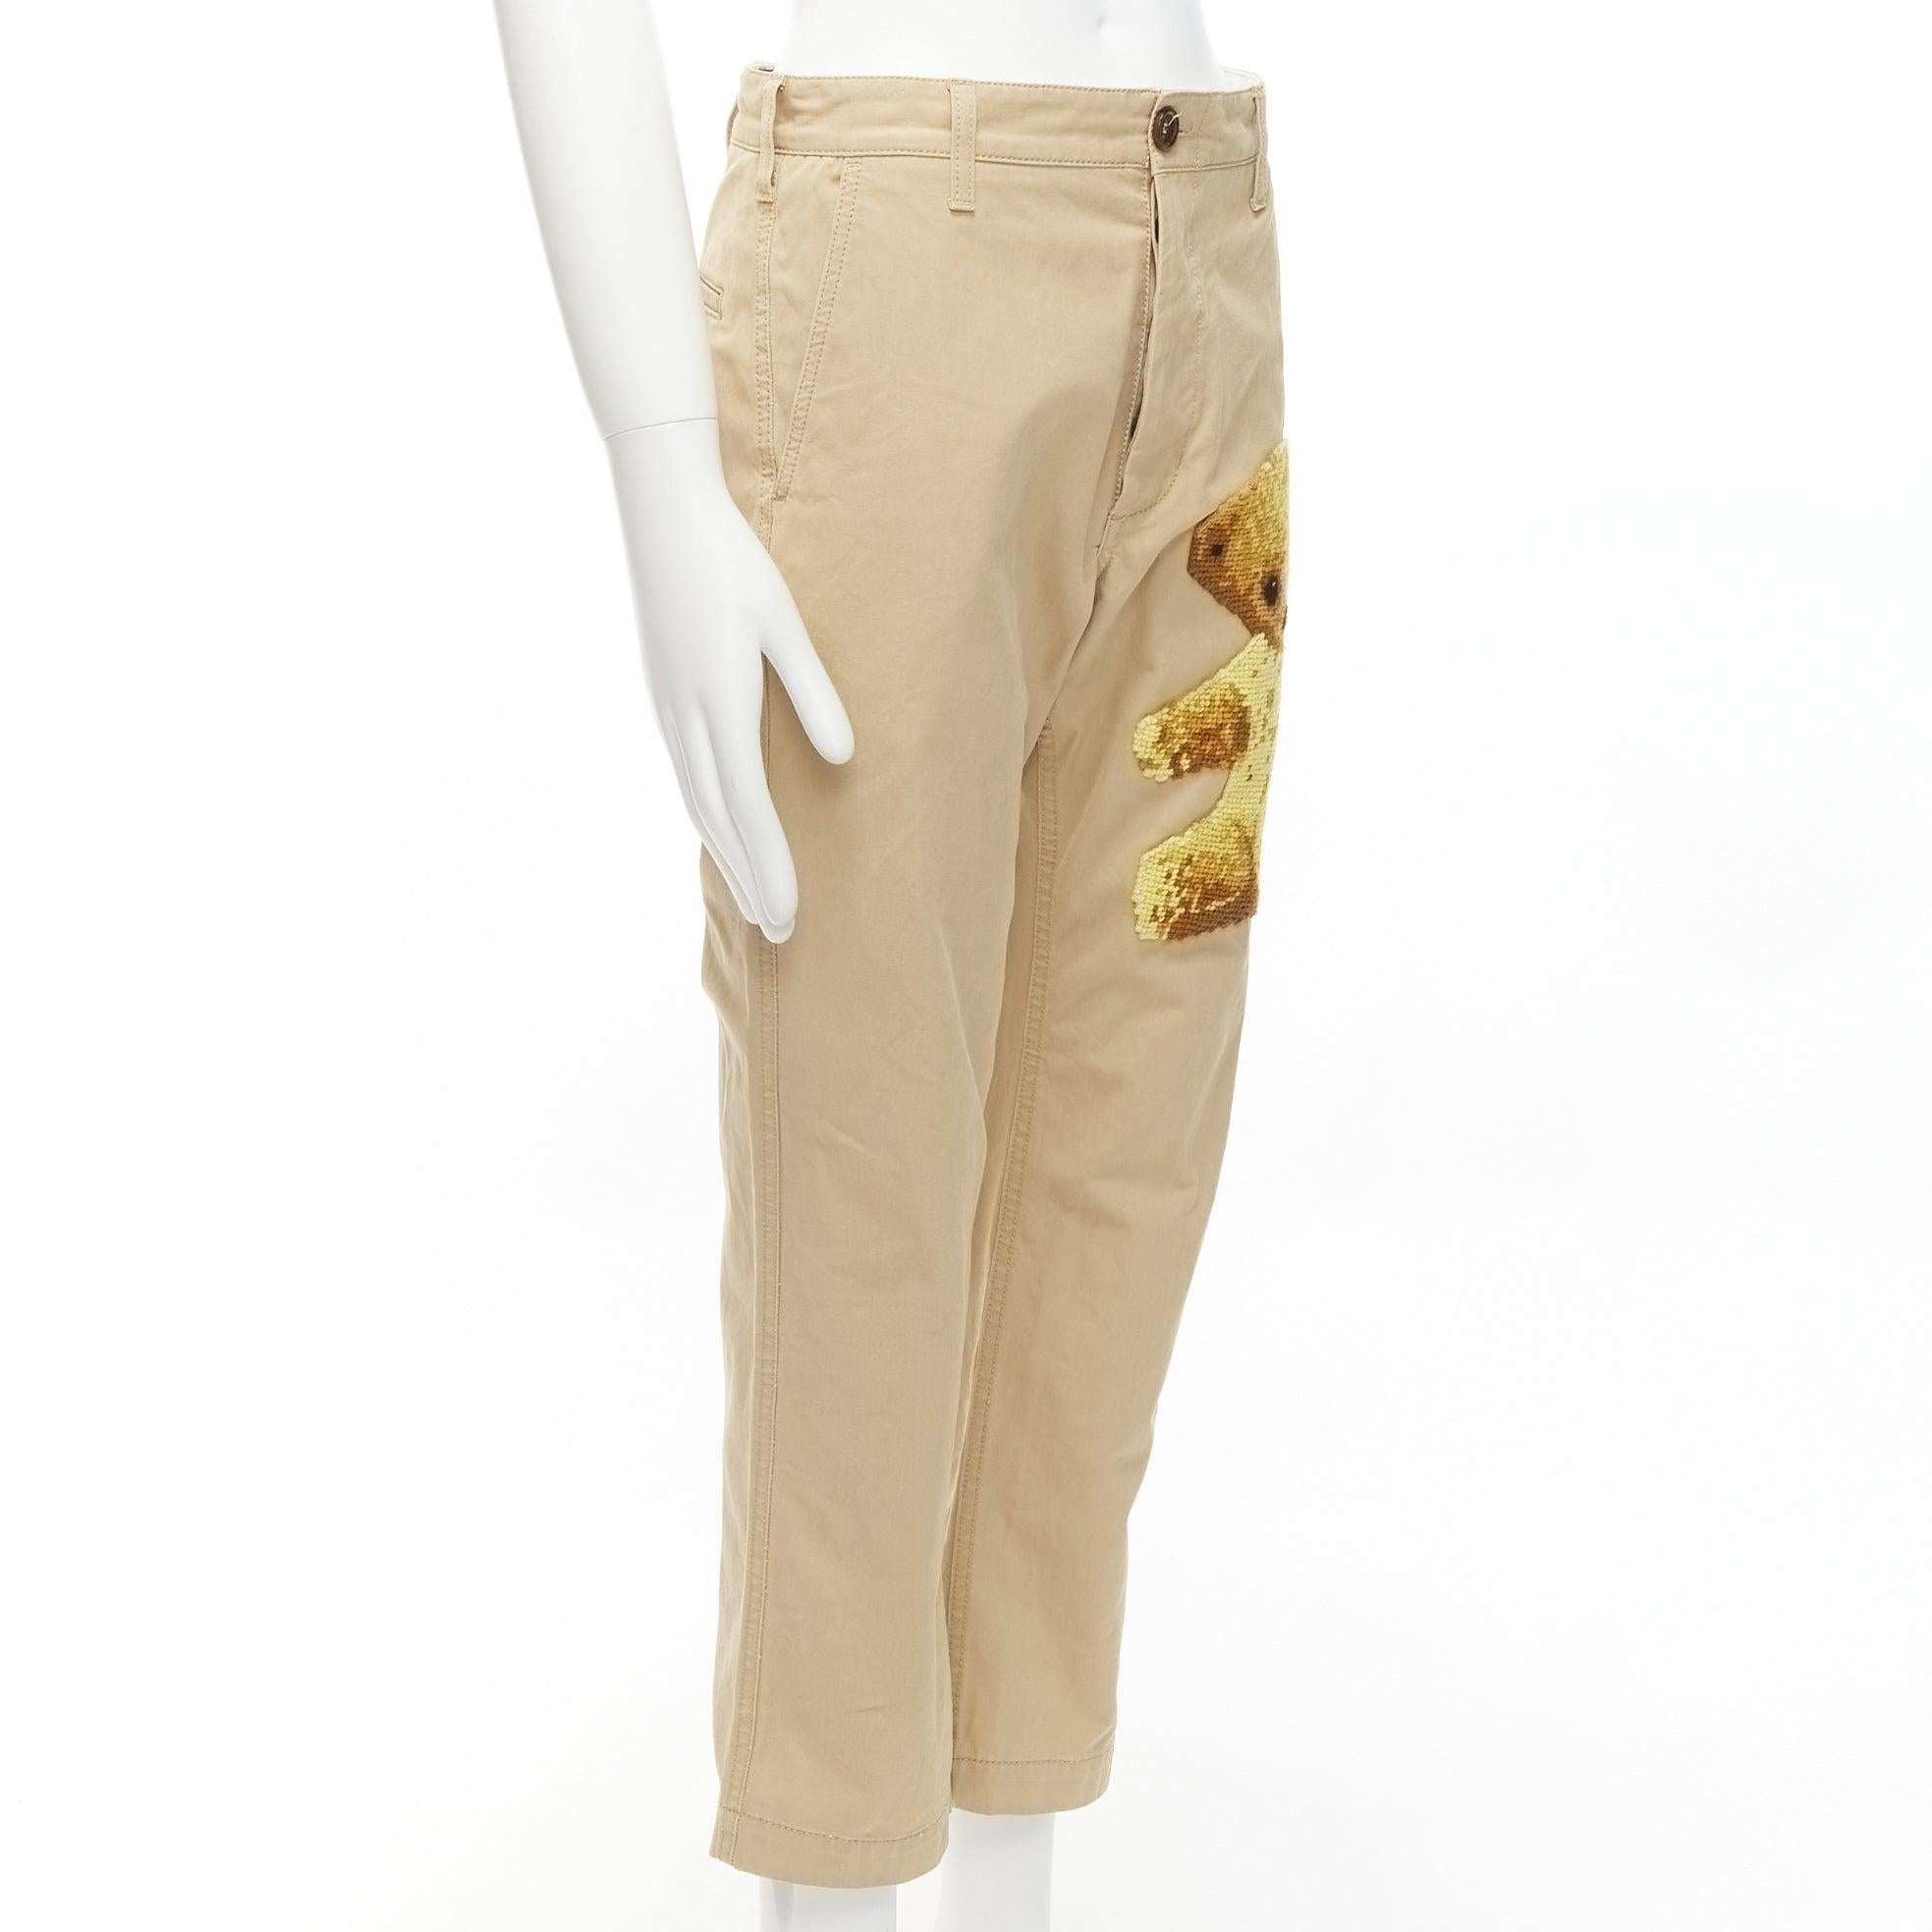 GUCCI Alessandro Michele brown Teddy Bear embroidery beige chino pants 30